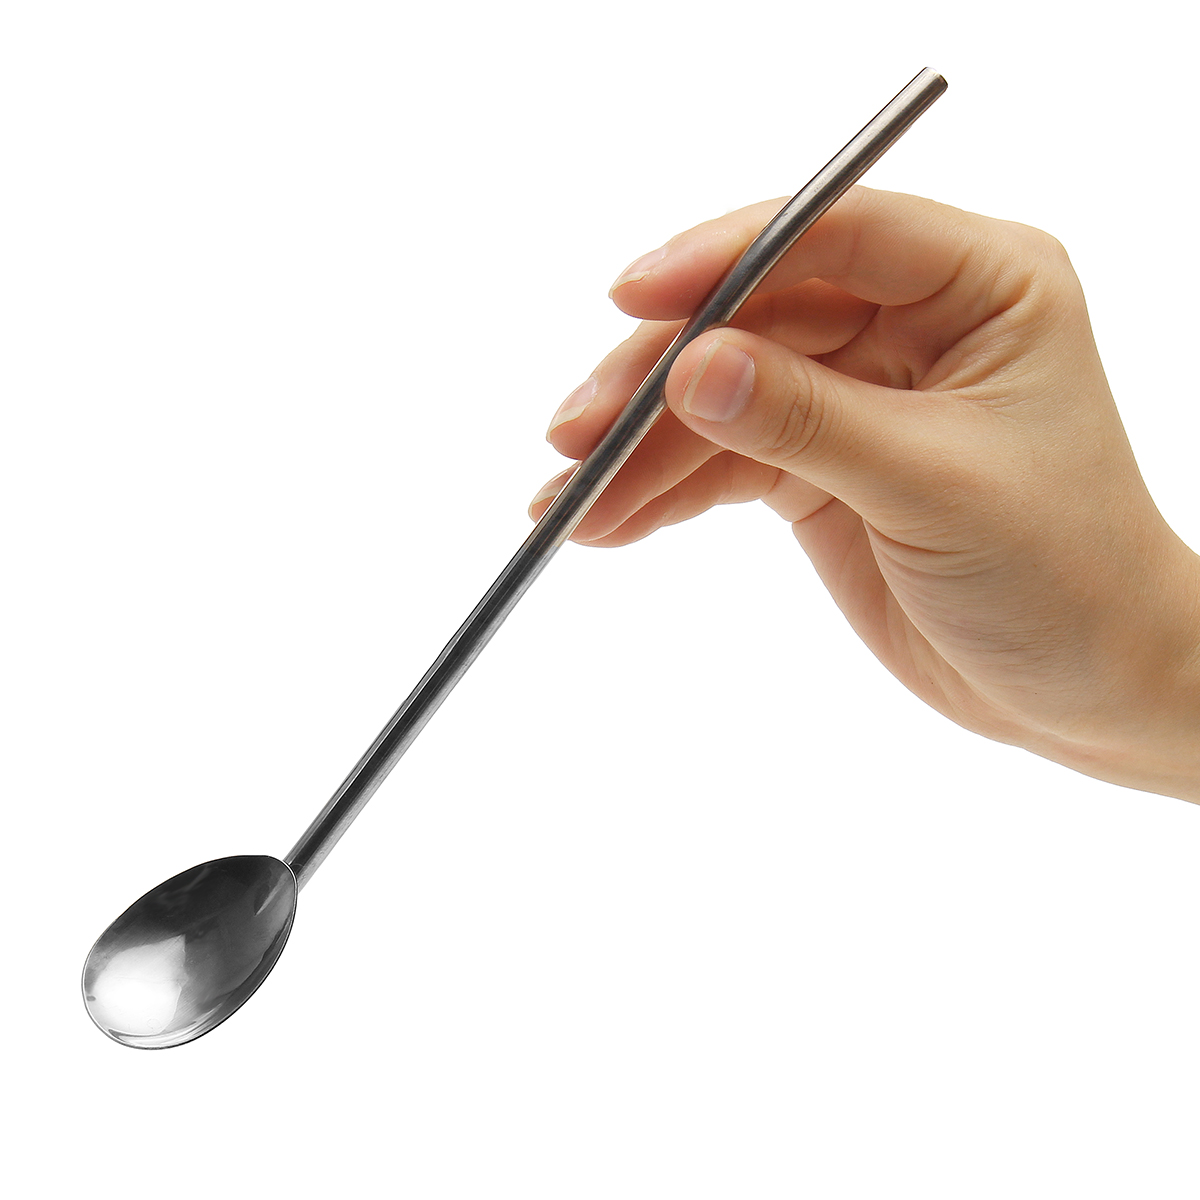 2-in-1-Spoon-Drinking-Straw-Stainless-Steel-304-Drinking-Coffee-Straw-Stirring-Spoon-Straws-Spoon--S-1505761-4